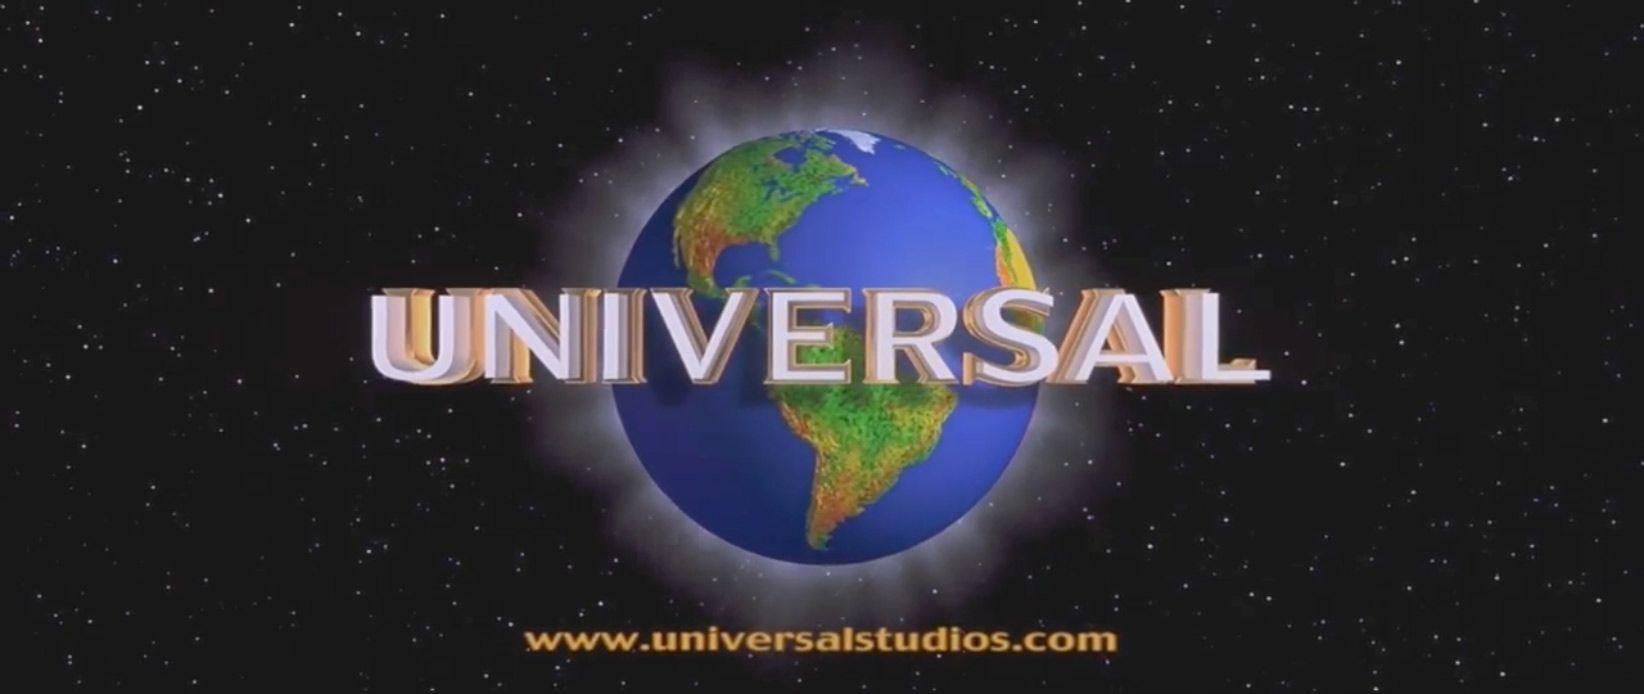 Universal 2017 Logo - Universal Pictures | About the Film Studio